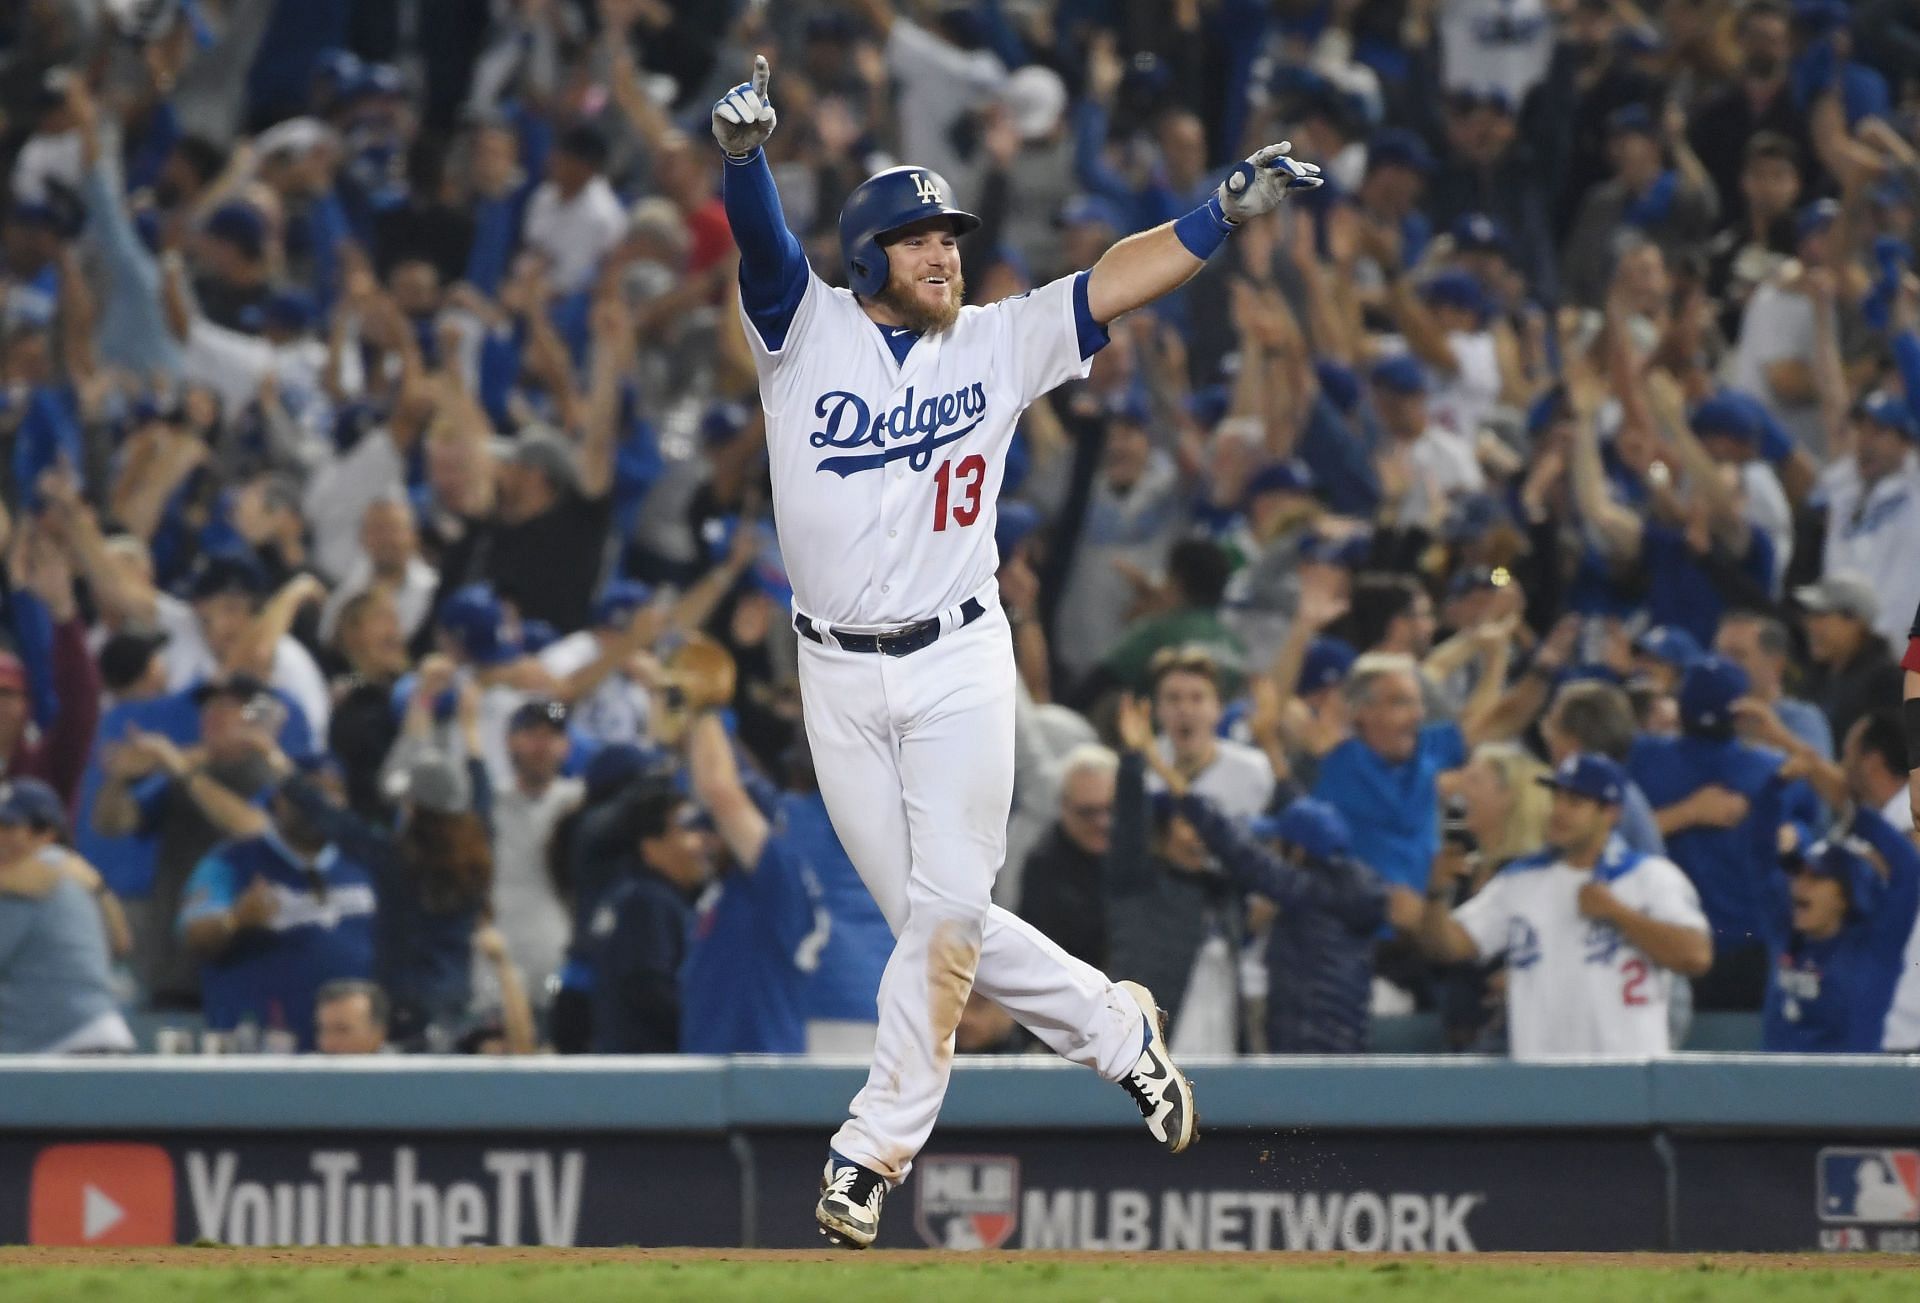 LA Dodgers IF Max Muncy celebrates his eighteenth inning walk-off home run to defeat the the Red Sox 3-2 in Game 3 of the 2018 World Series Championship at Dodger Stadium